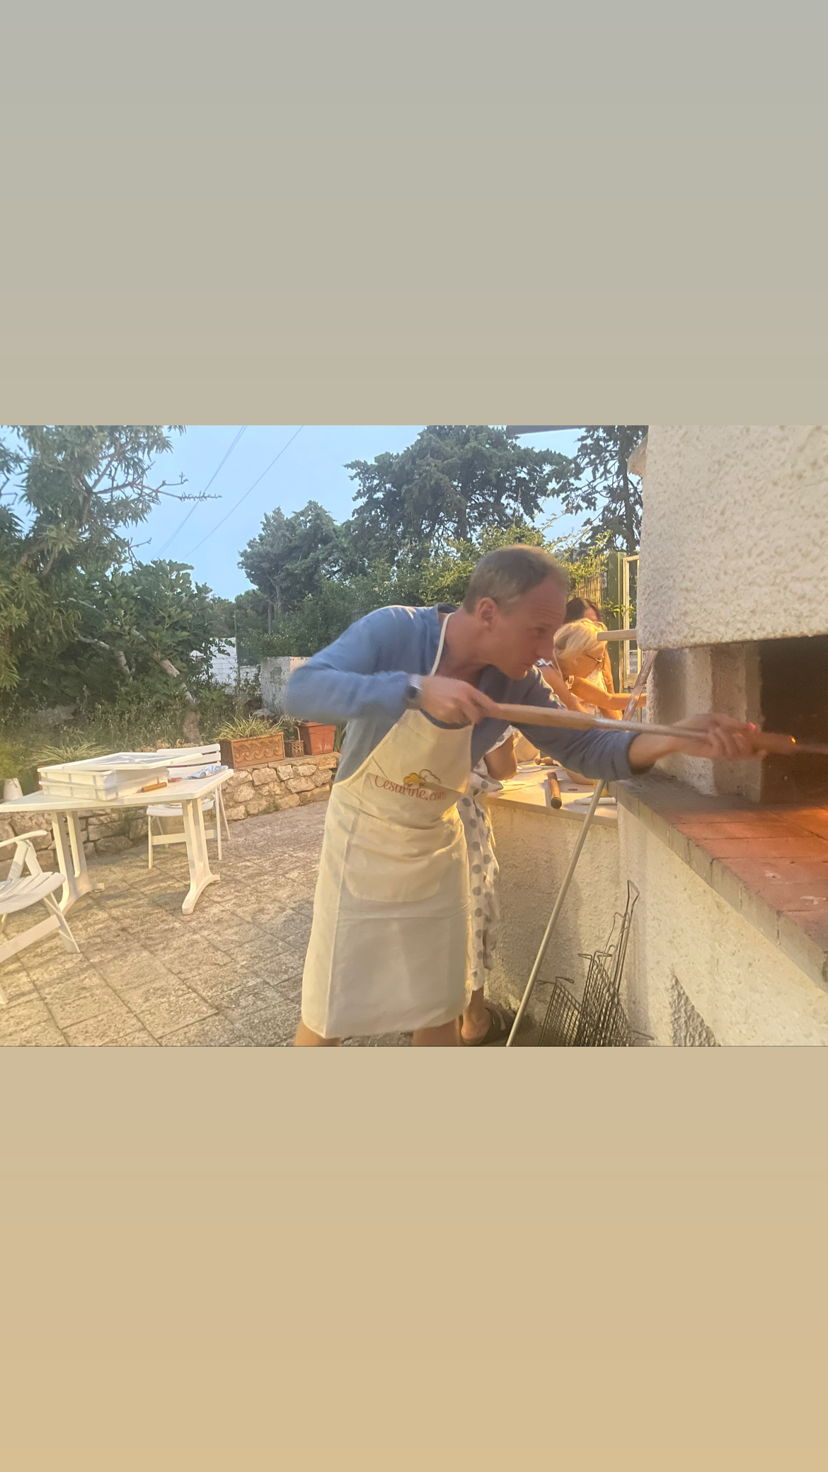 Cooking classes Cozze: Learn to make pizza in a real wood oven!